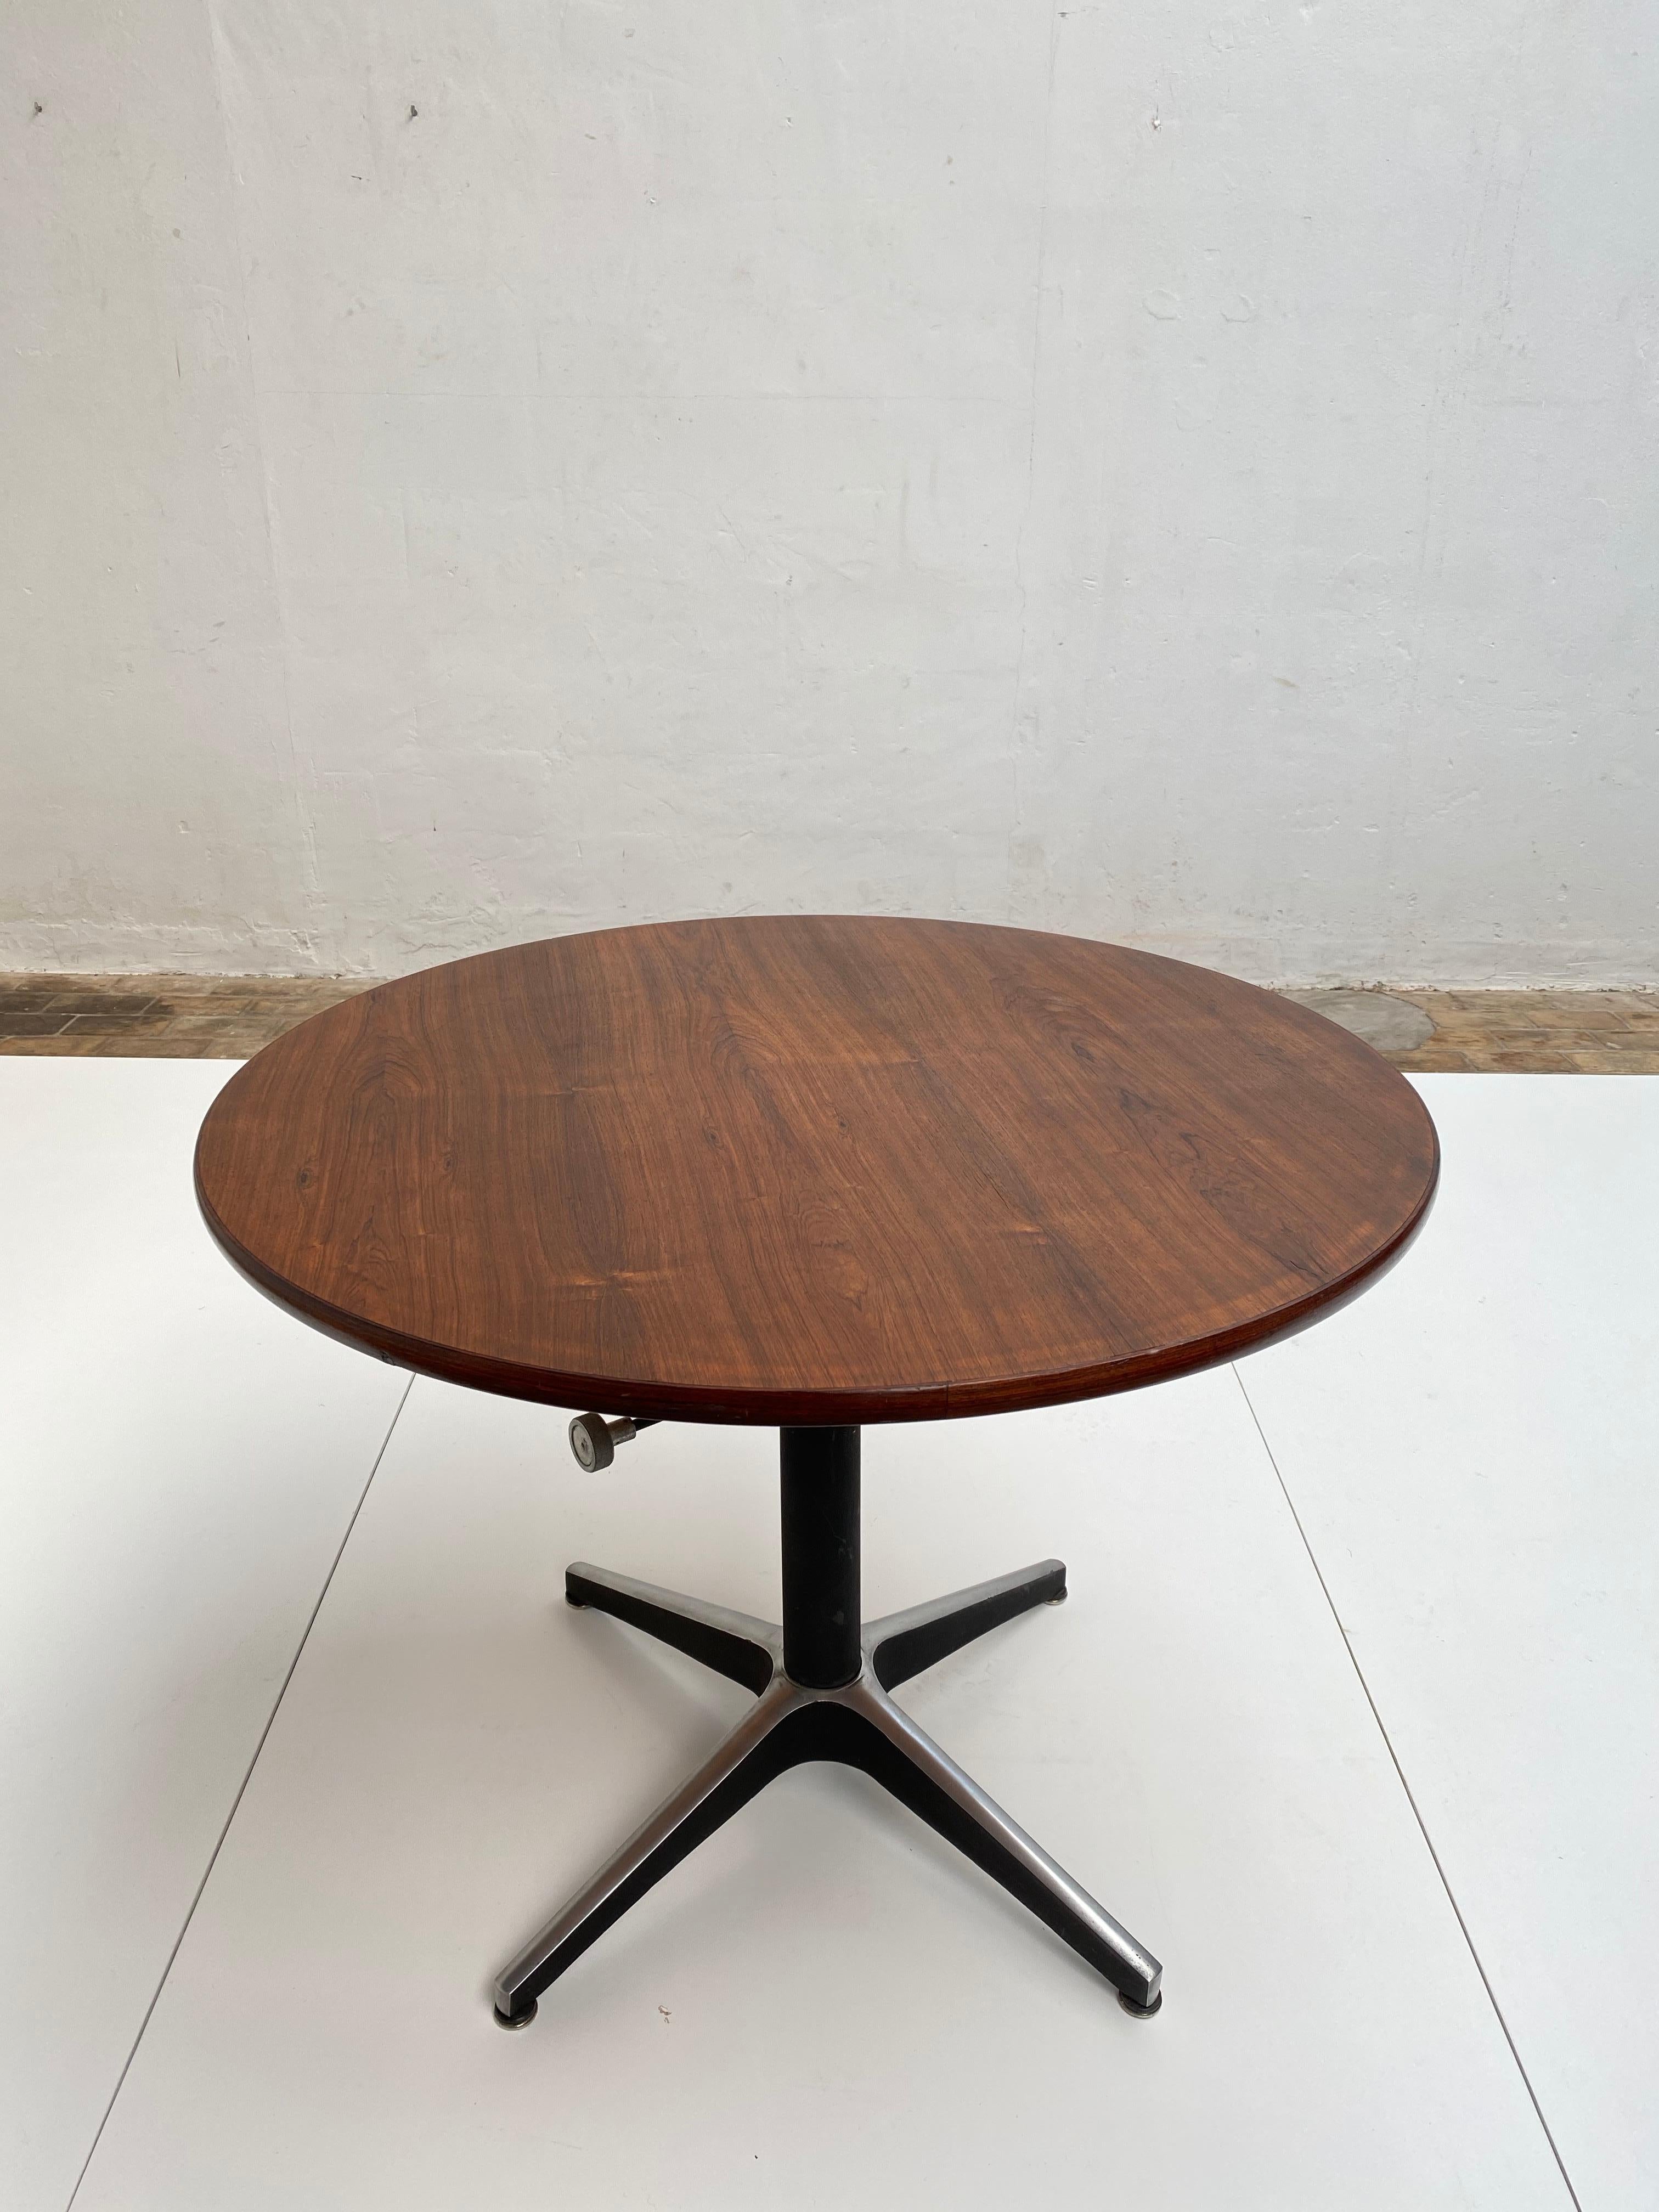 Rare and elegant circular form, adjustable height, dining table designed in 1959 by famed italian designers Franco Campo and Carlo Graffi for their own design company 'Home'.

 Campo & Graffi studied under and collaborated with Carlo Mollino on